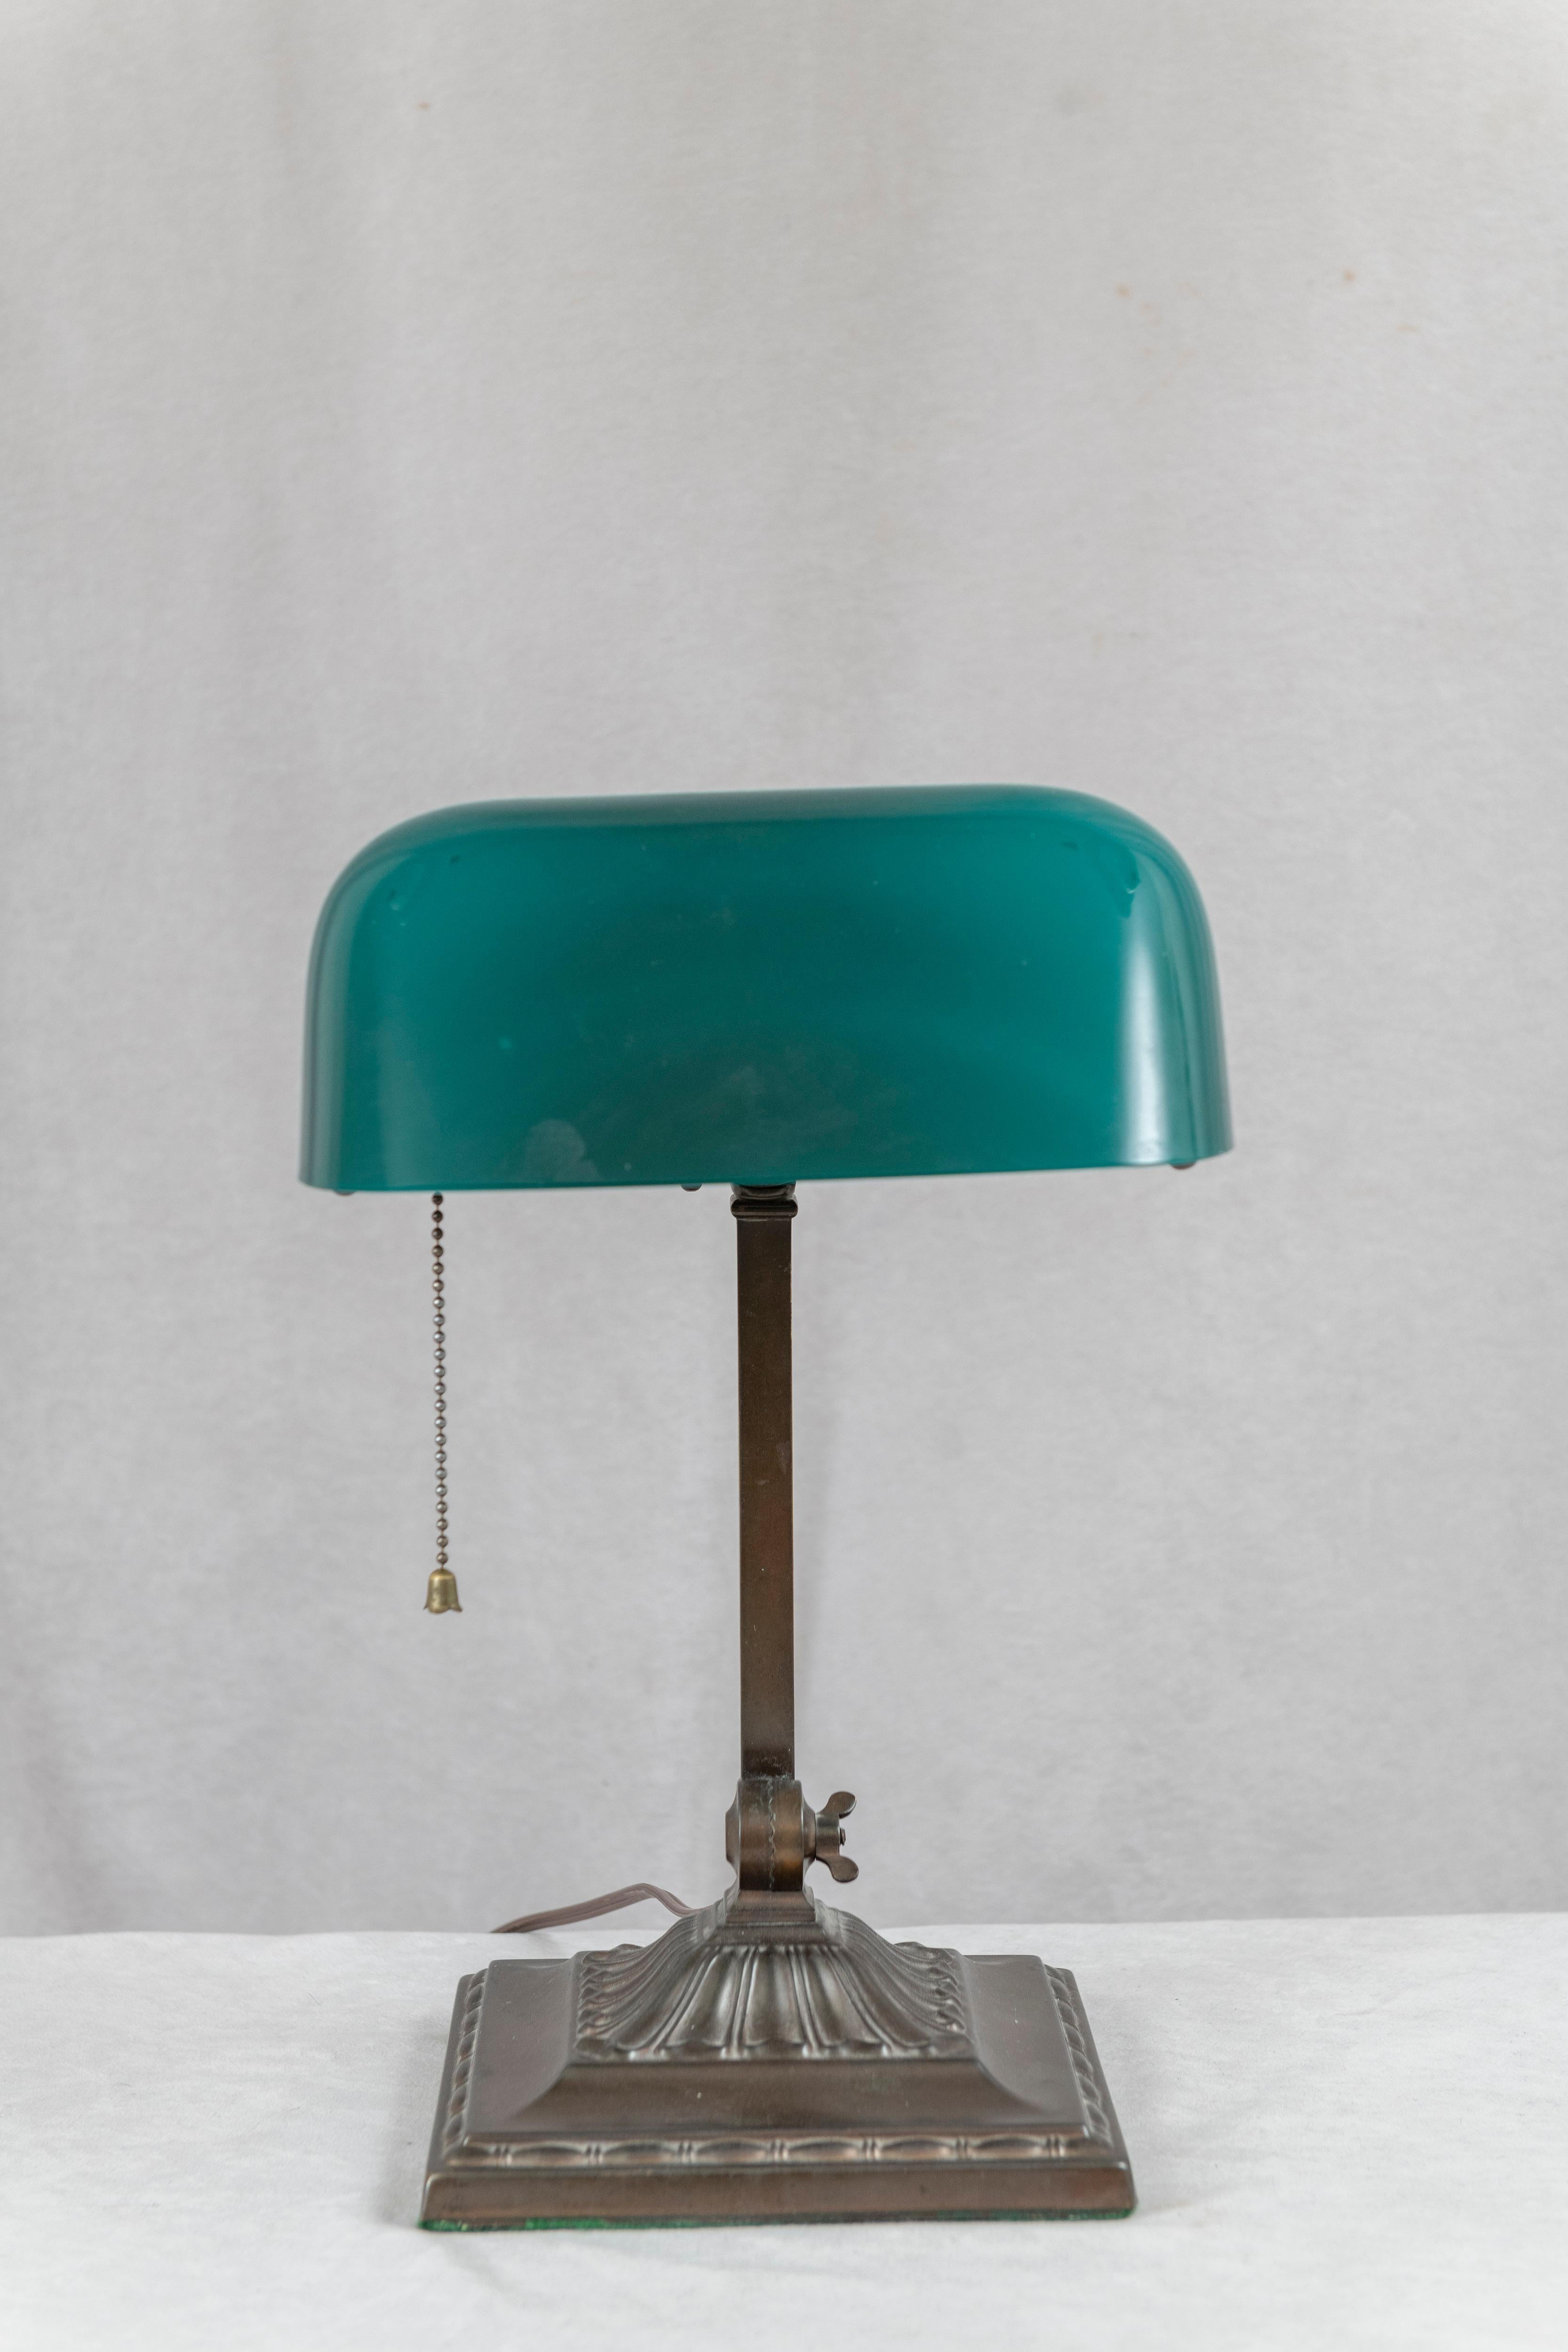 Patinated Antique Banker's Desk Lamp by Emeralite, Original Green Shade, ca. 1917 For Sale